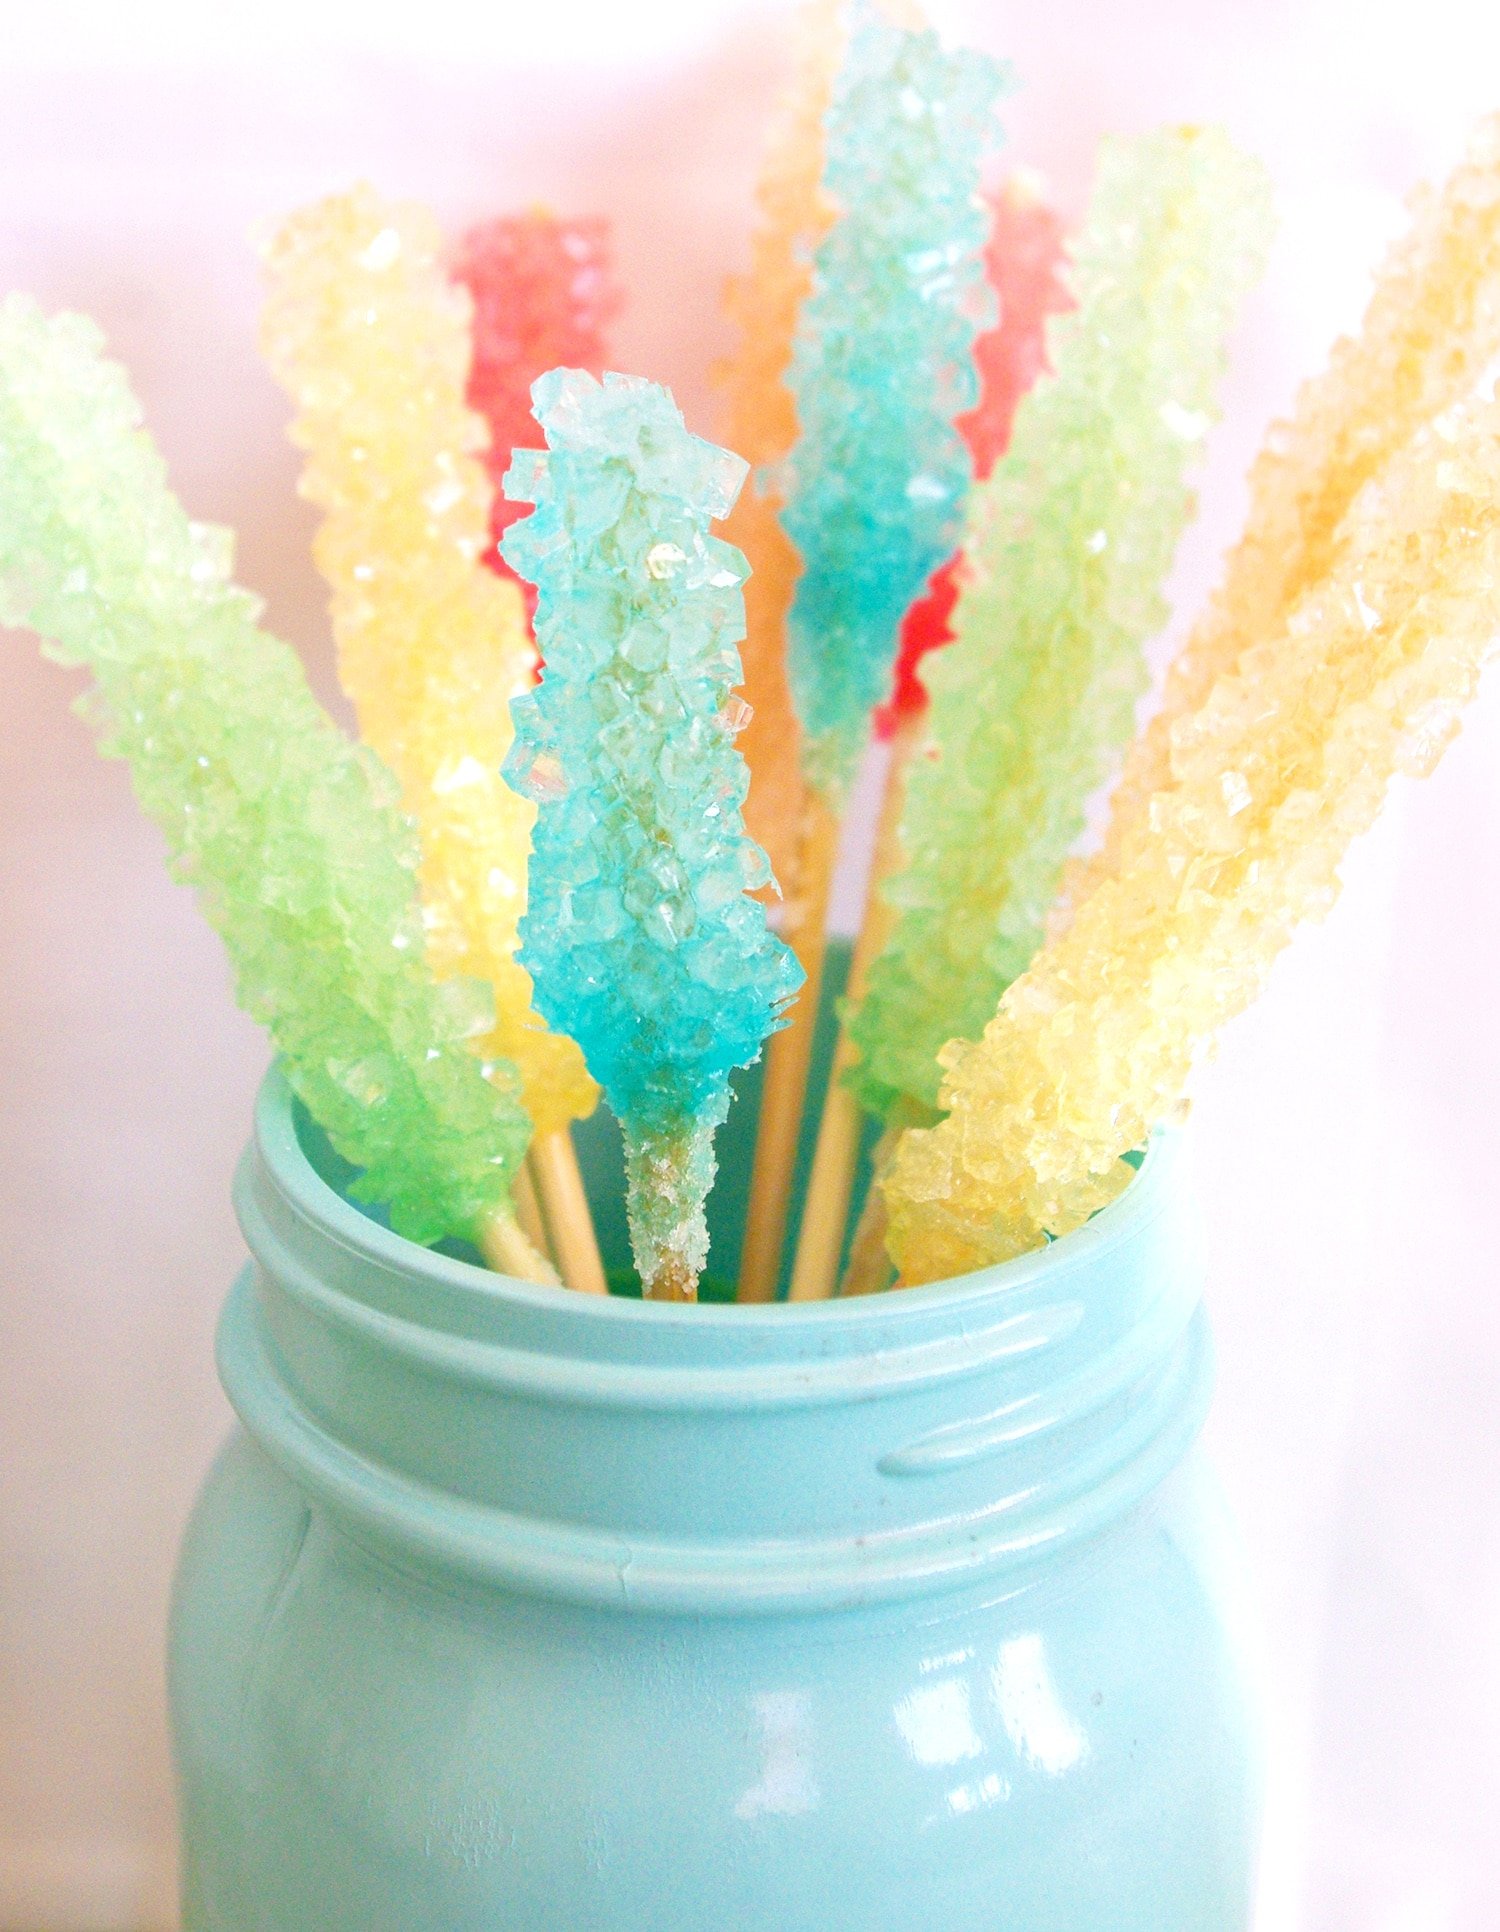 https://www.happinessishomemade.net/wp-content/uploads/2021/07/Rock-Candy-in-a-Jar.jpg